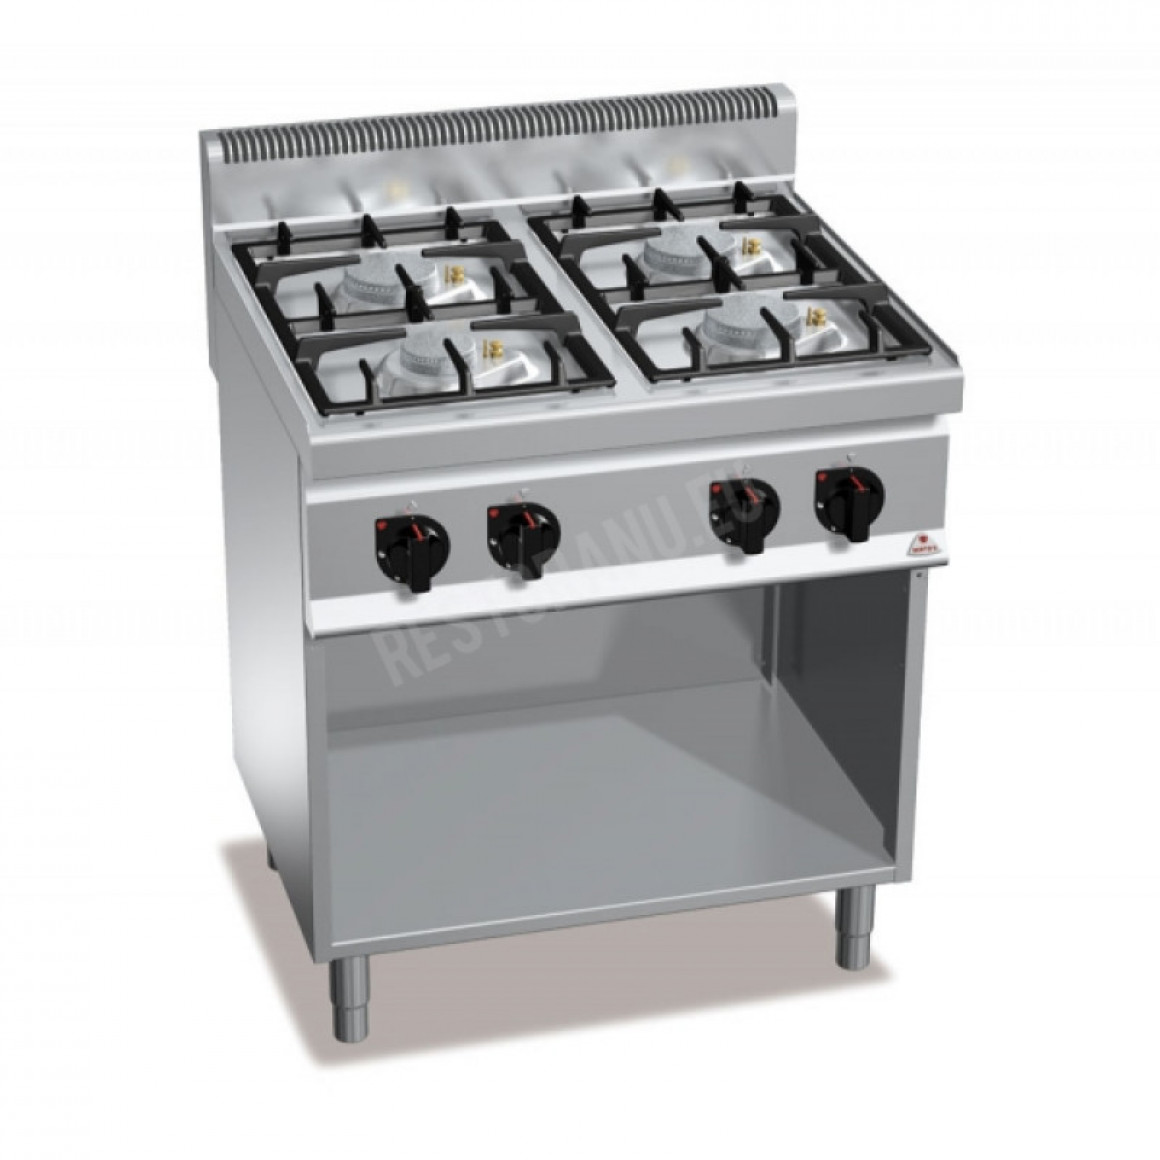 GAS COOKER 4 BURNERS ECO POWER G7F4MPW